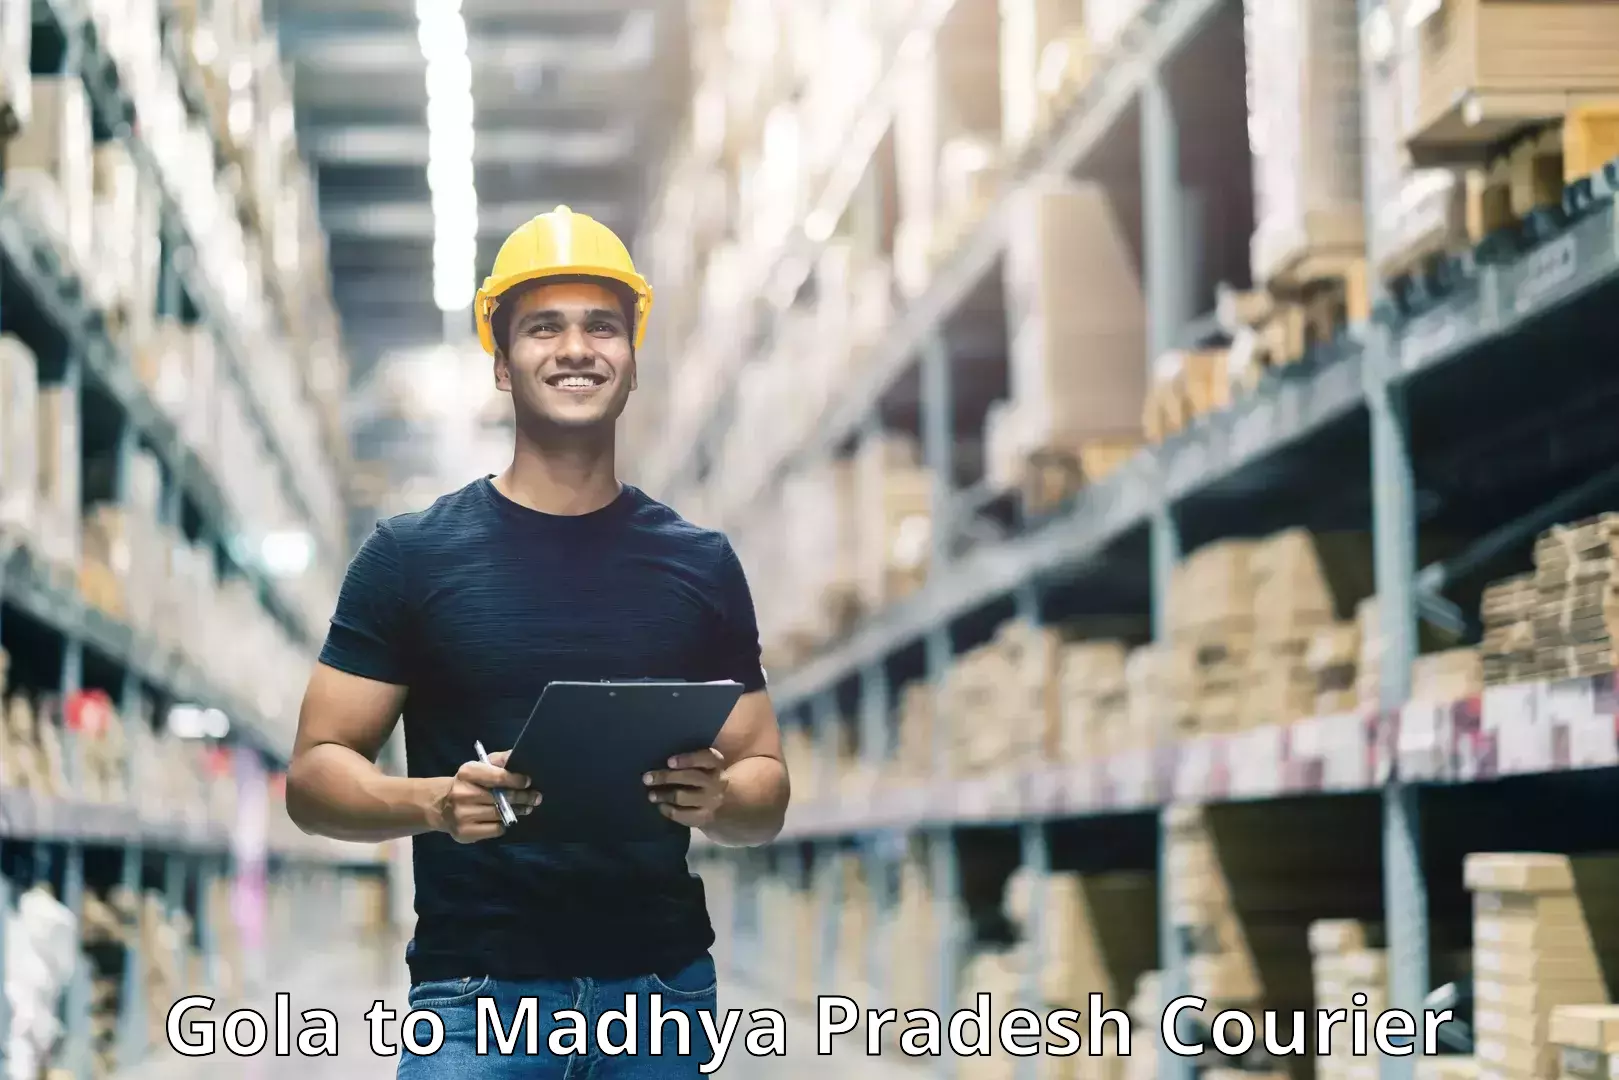 Small business couriers in Gola to Madhya Pradesh